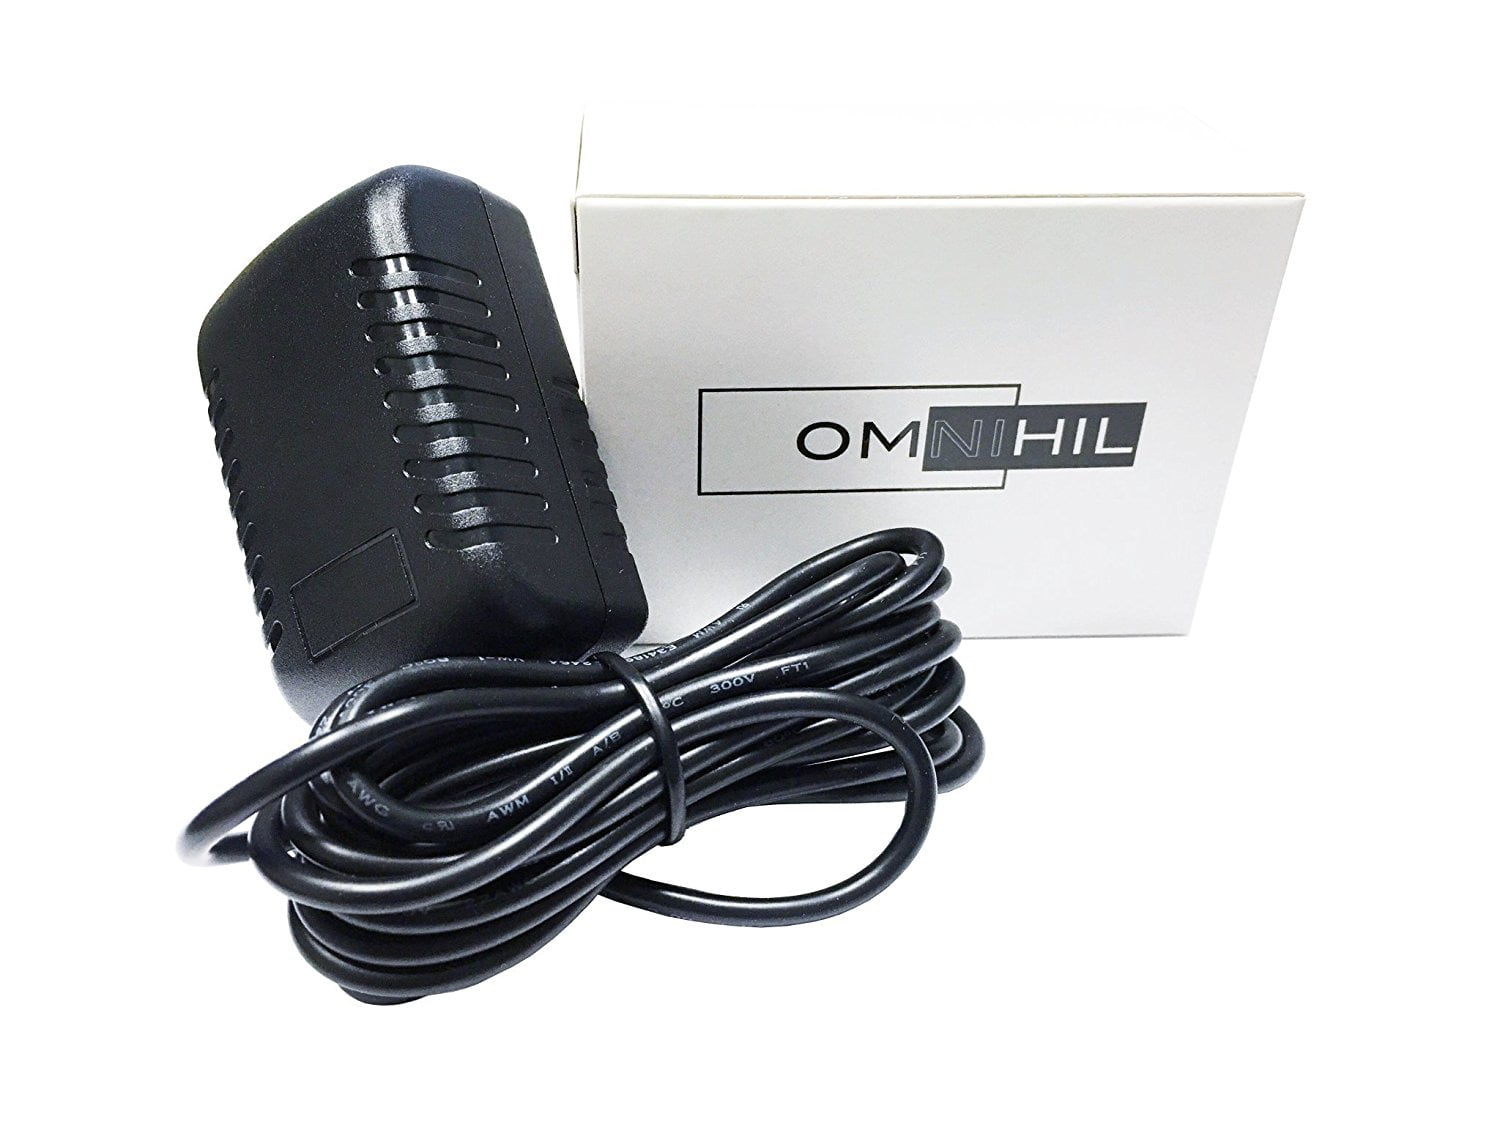 Details about   Adjustable AC DC Power Supply Adapter Charger Plug 3-12V 9-24V With LED Display 